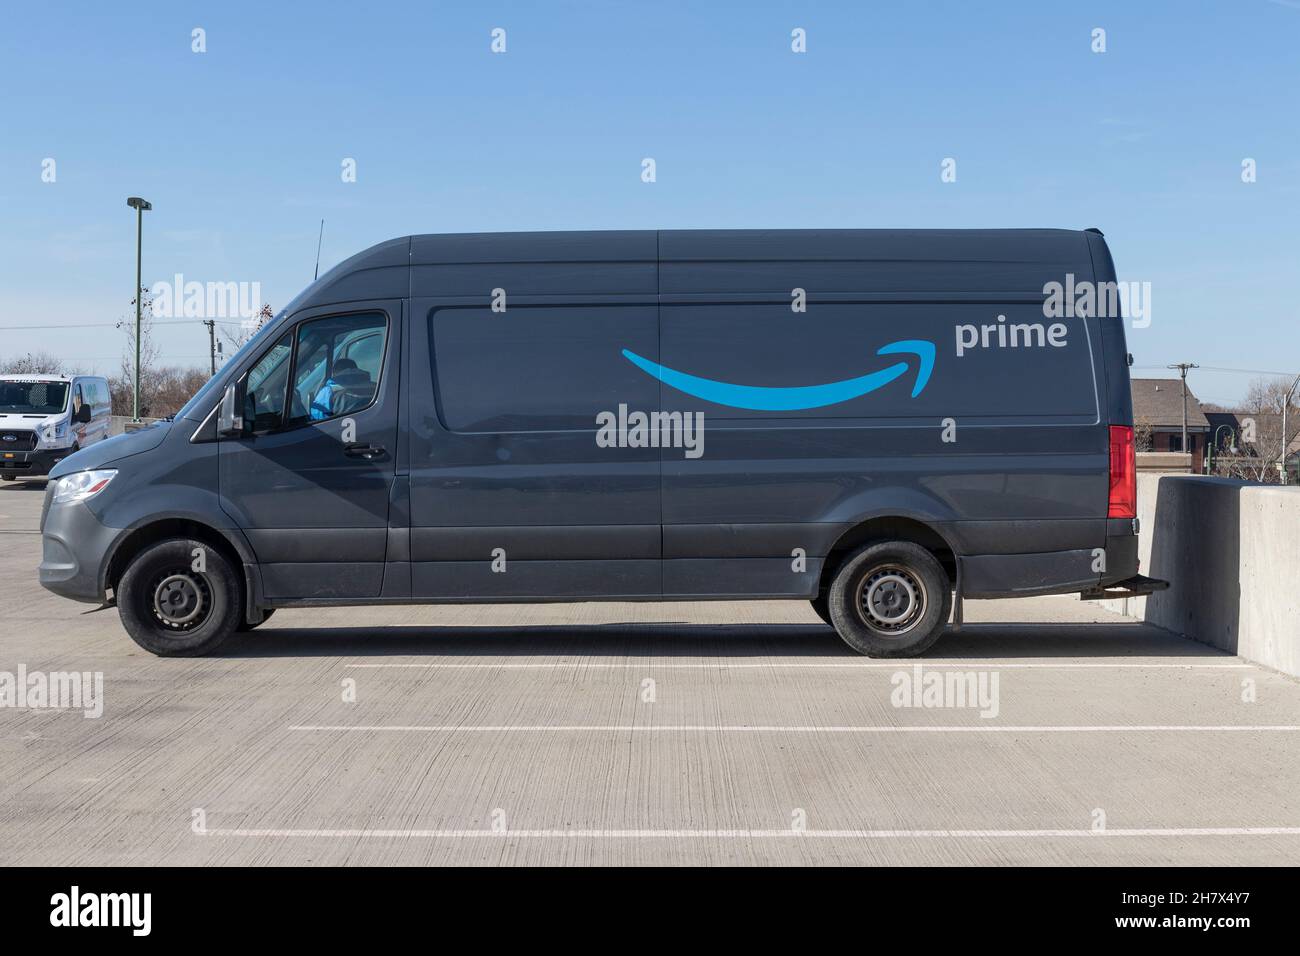 Beavercreek - Circa November 2021: Amazon Prime delivery van. Amazon.com is  getting In the delivery business With Prime branded vans Stock Photo - Alamy